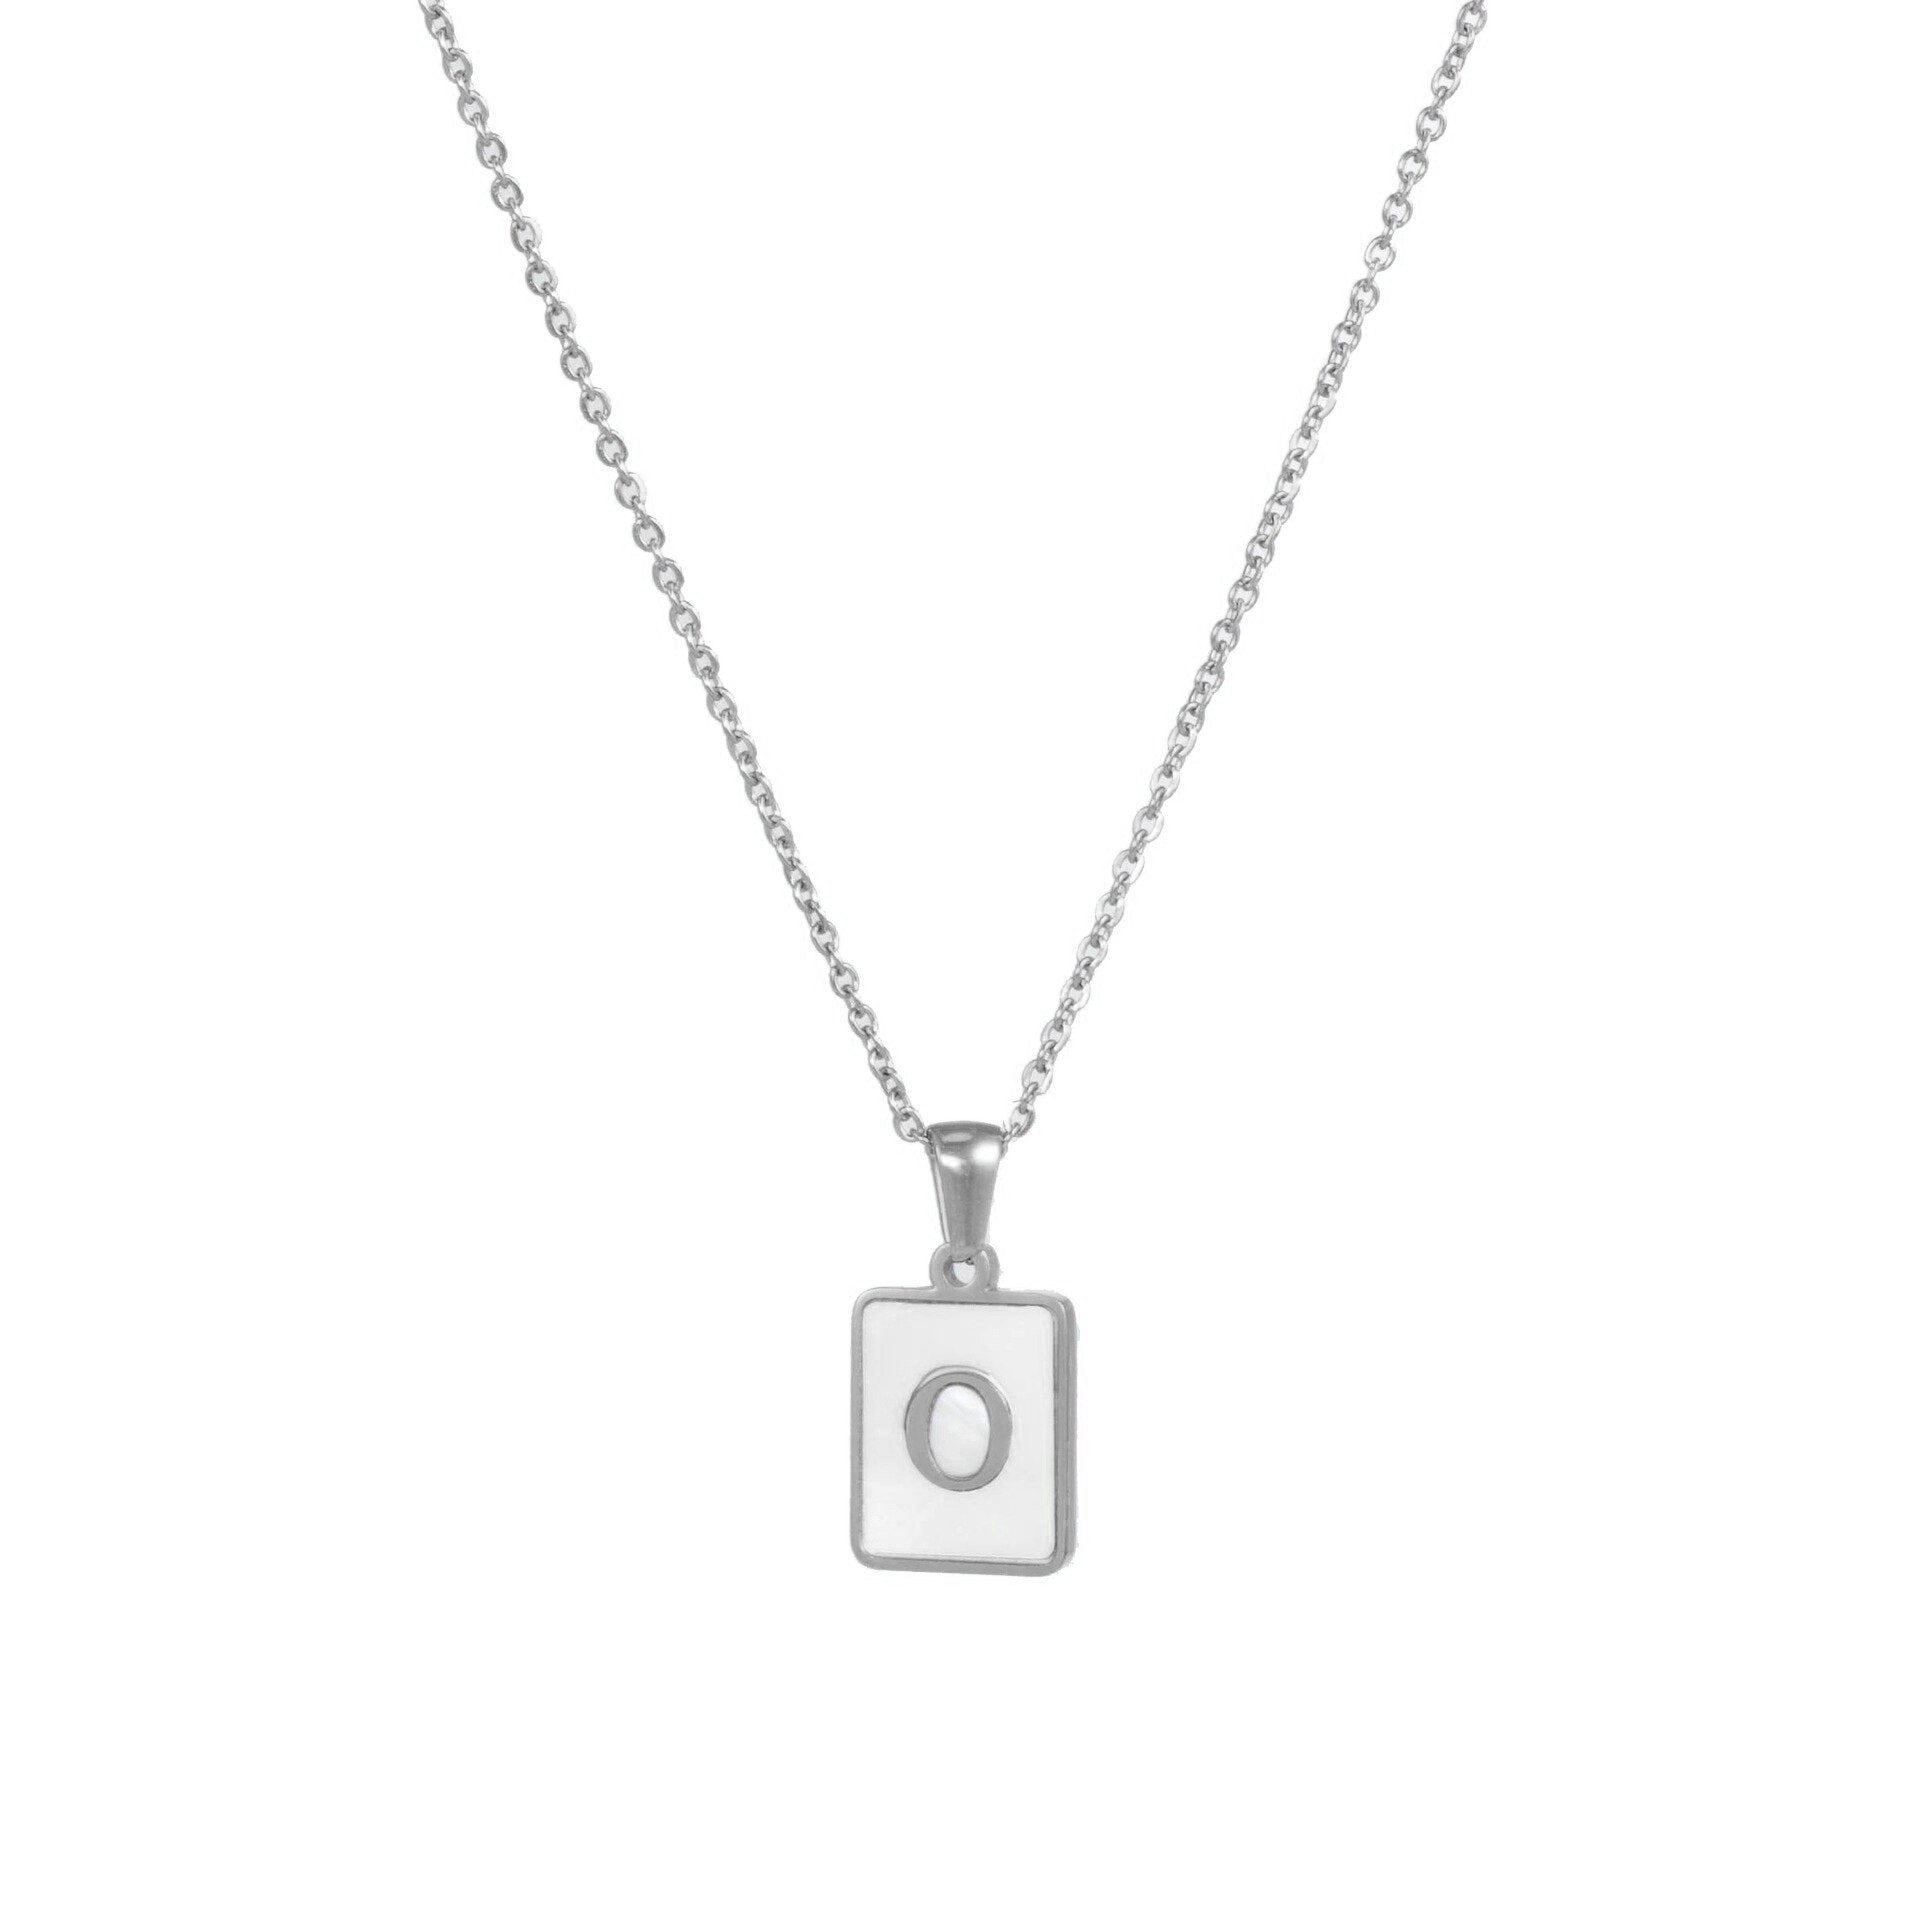 Silver Mother of Pearl Monogram Necklace, Letter O.